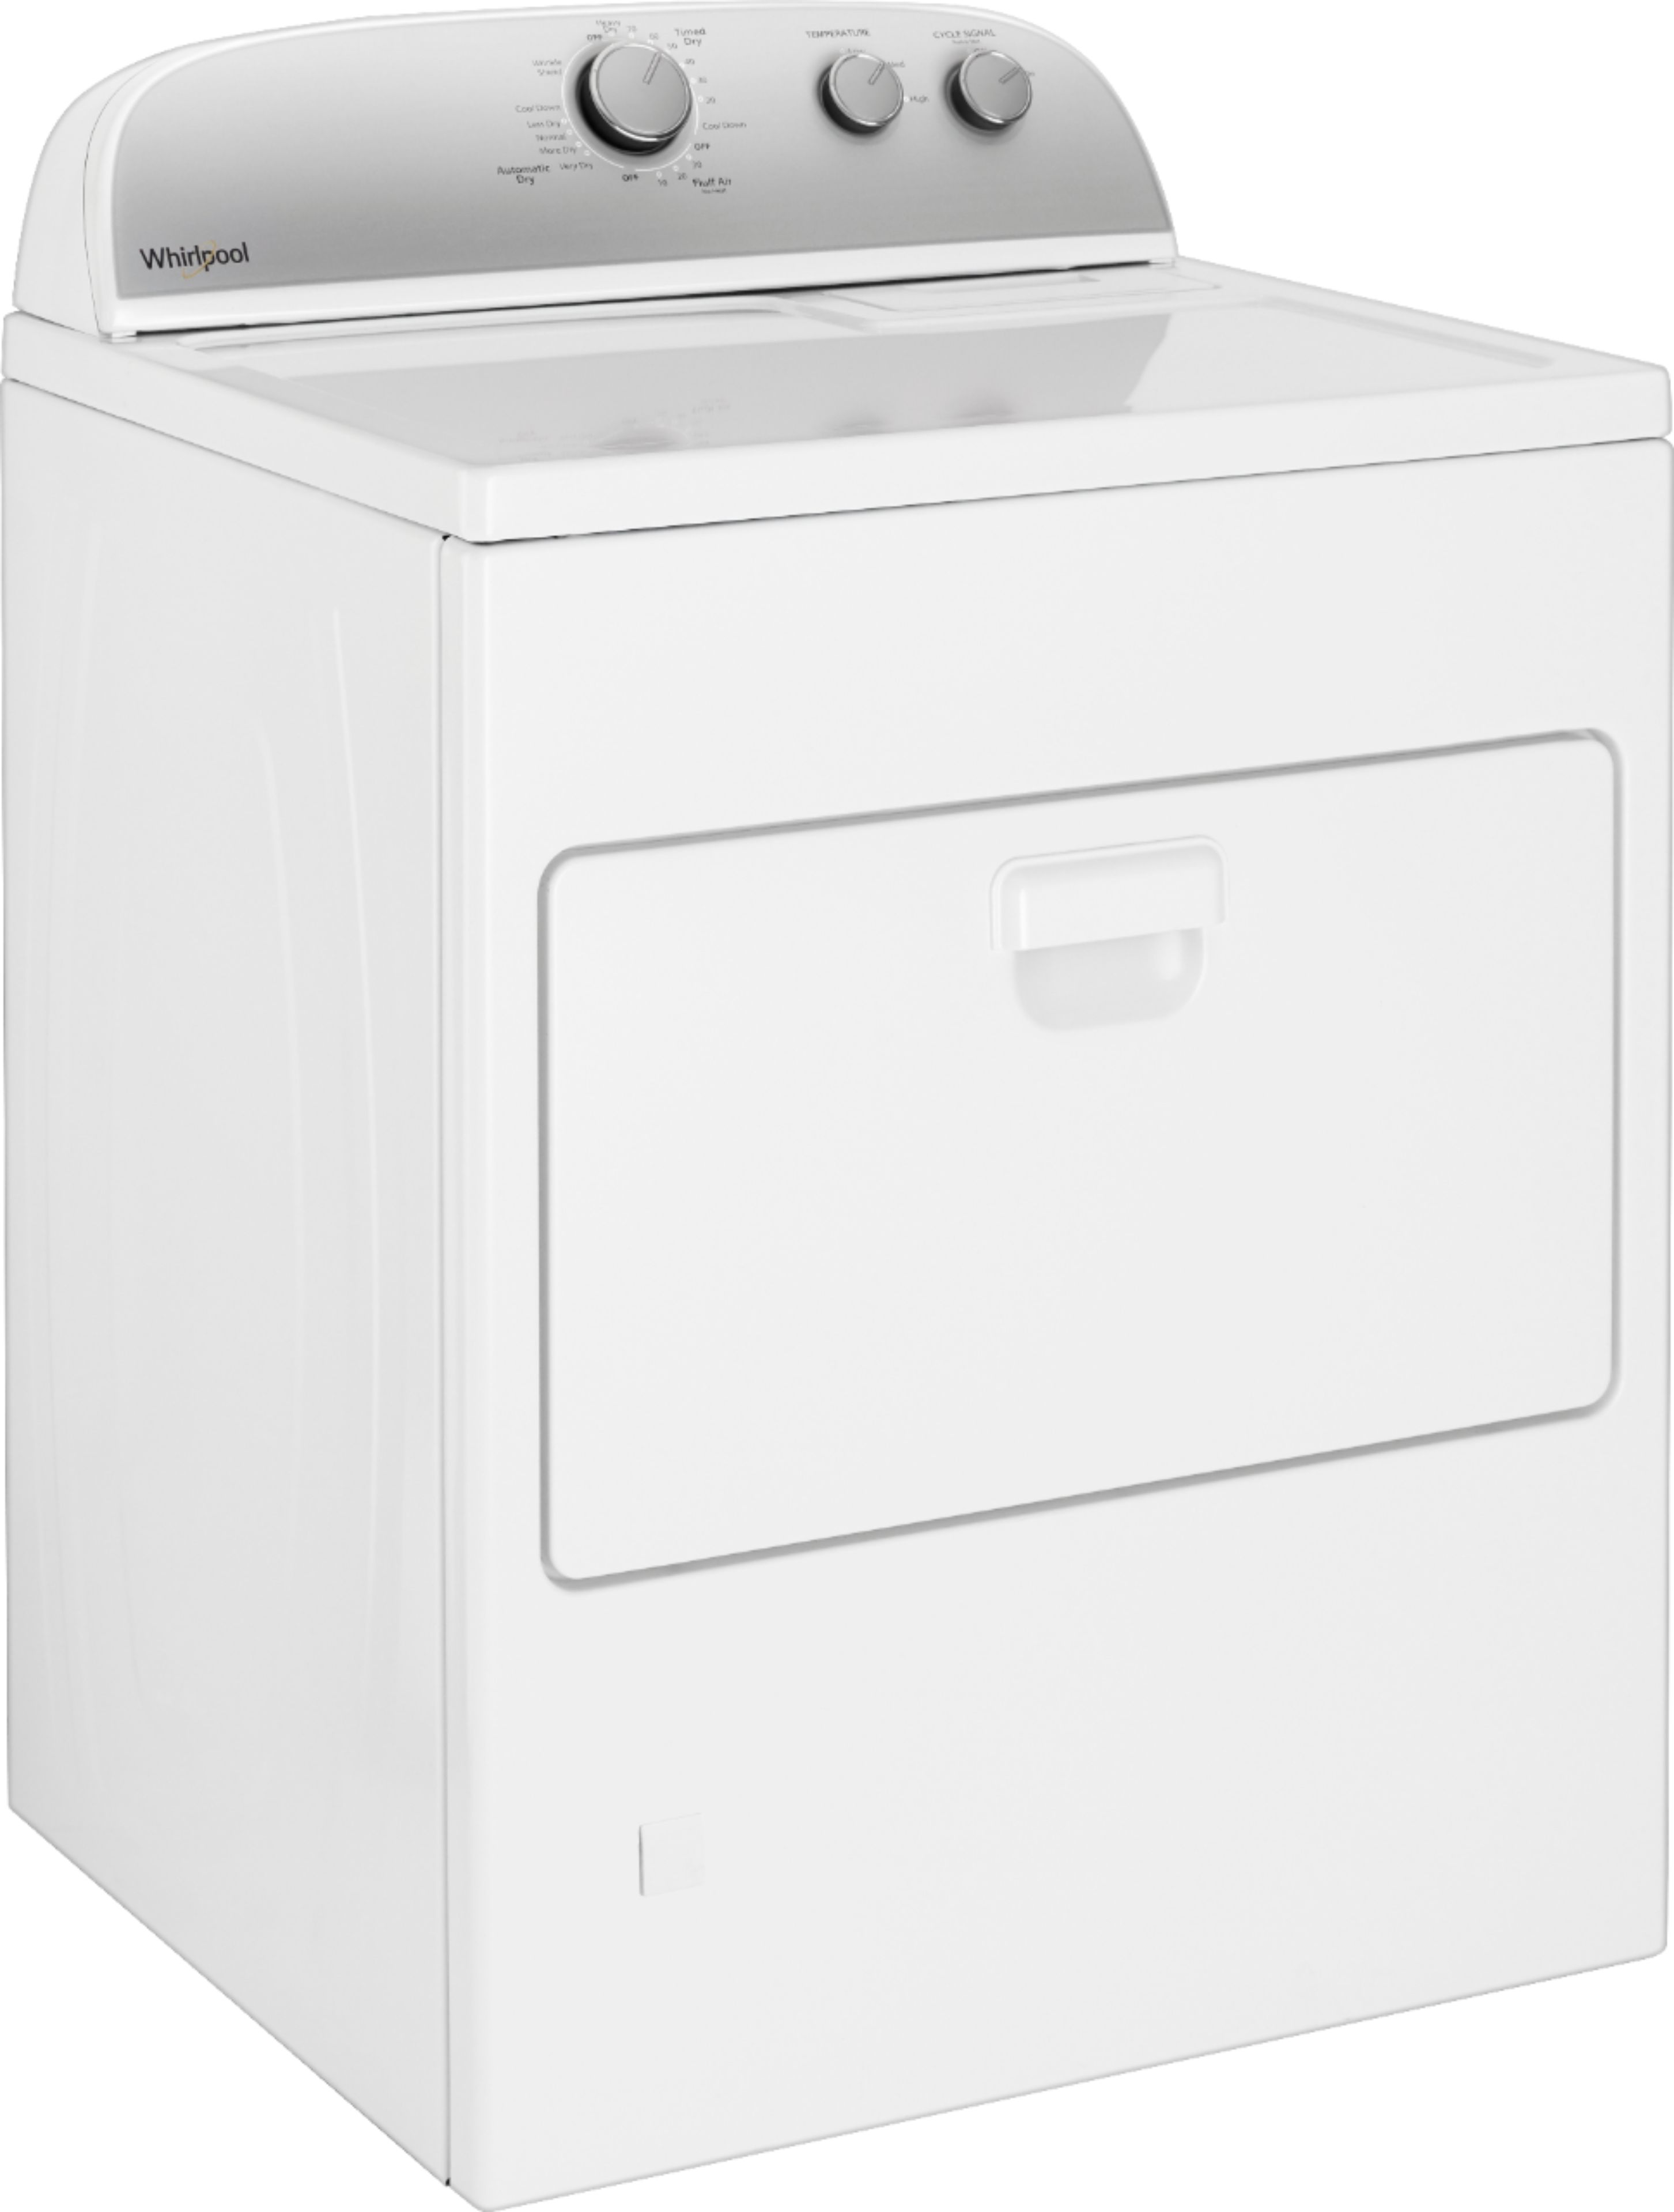 Angle View: Whirlpool - 6.7 Cu. Ft. Electric Dryer with Porcelain-Enamel Top - White